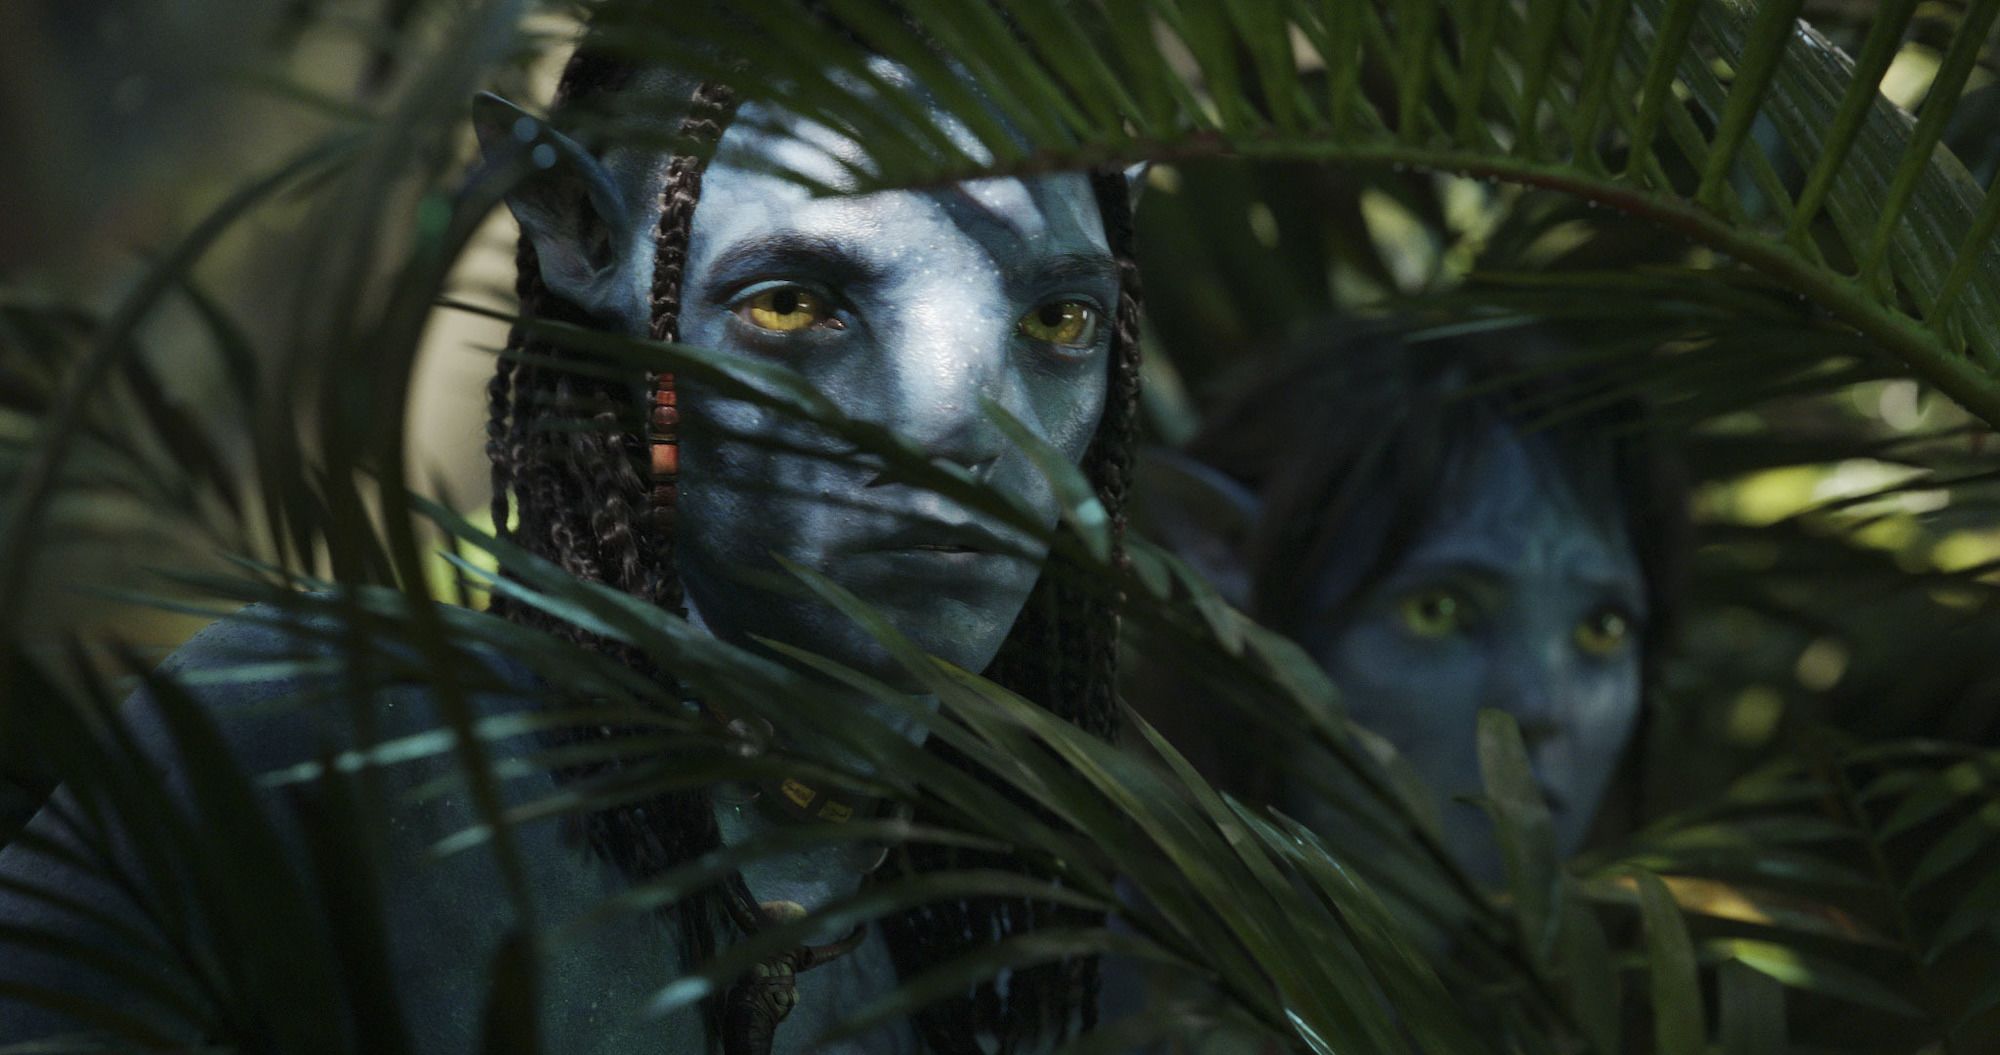 Avatar' sequel needs $2 billion to break even. But are audiences still excited about 3D? | CNN Business